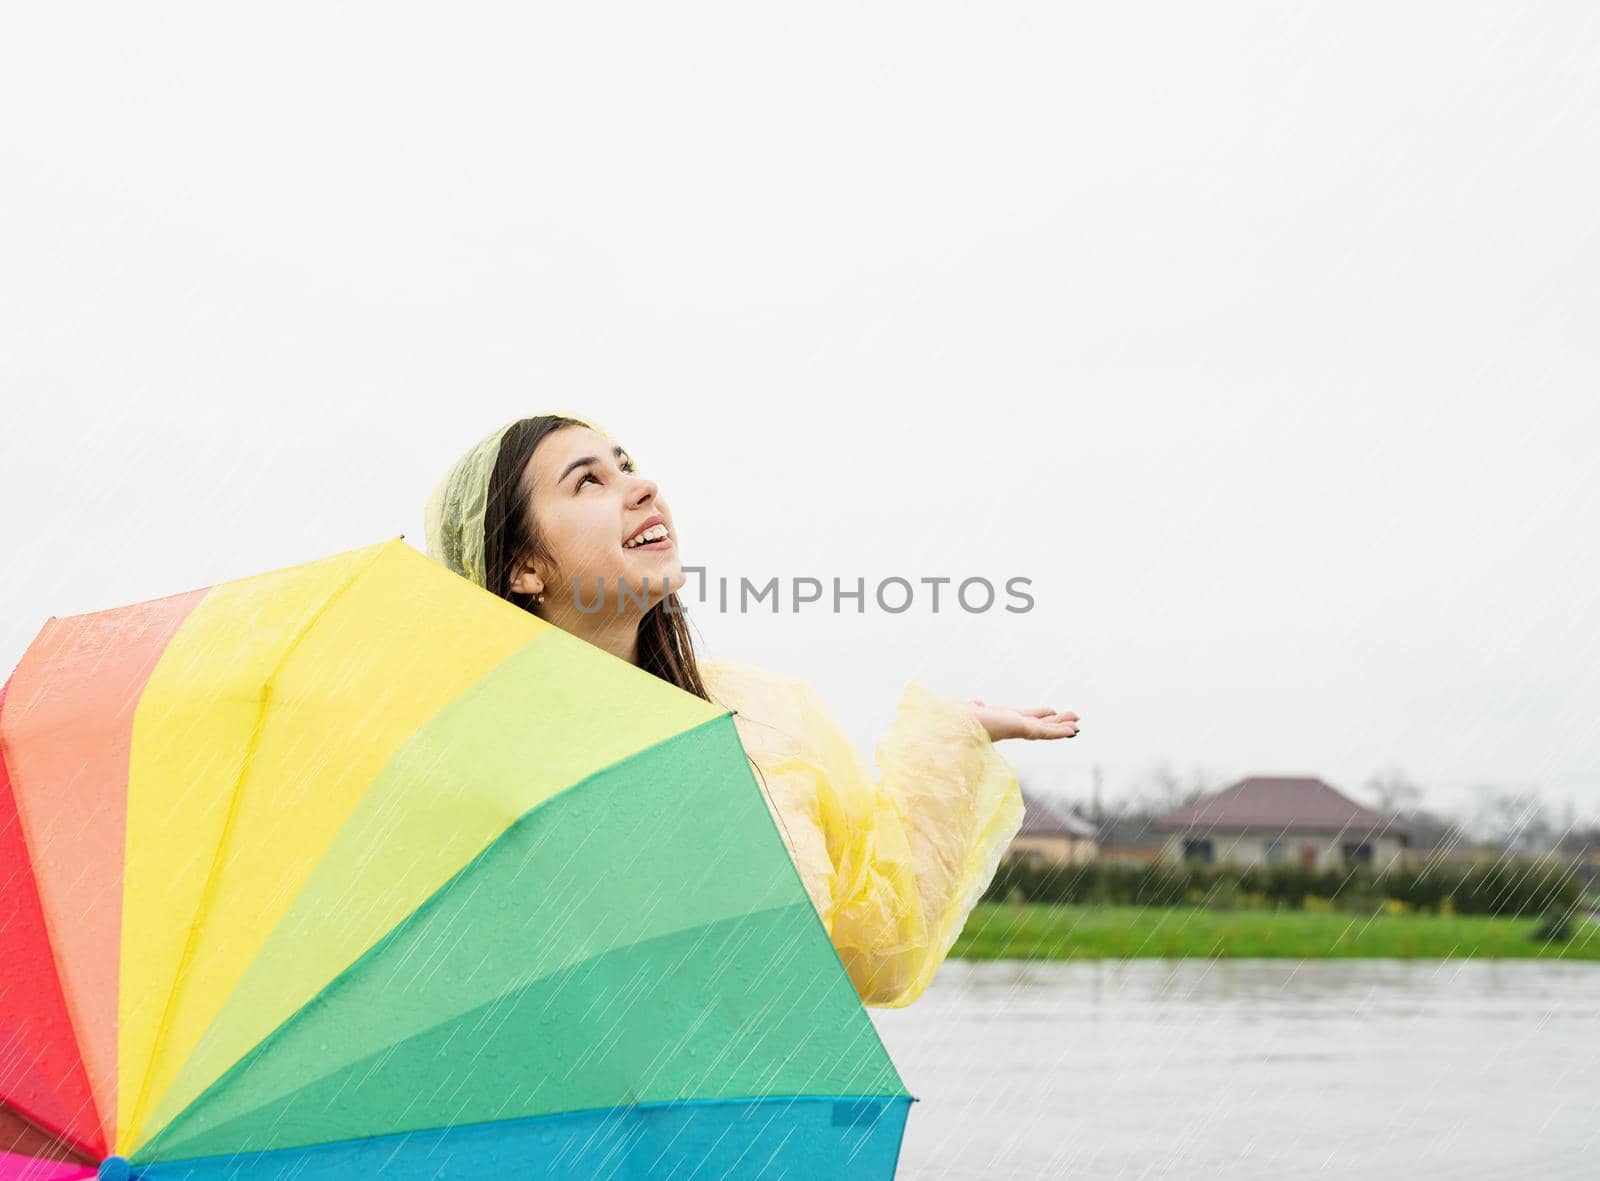 Beautiful brunette woman holding colorful umbrella out in the rain by Desperada